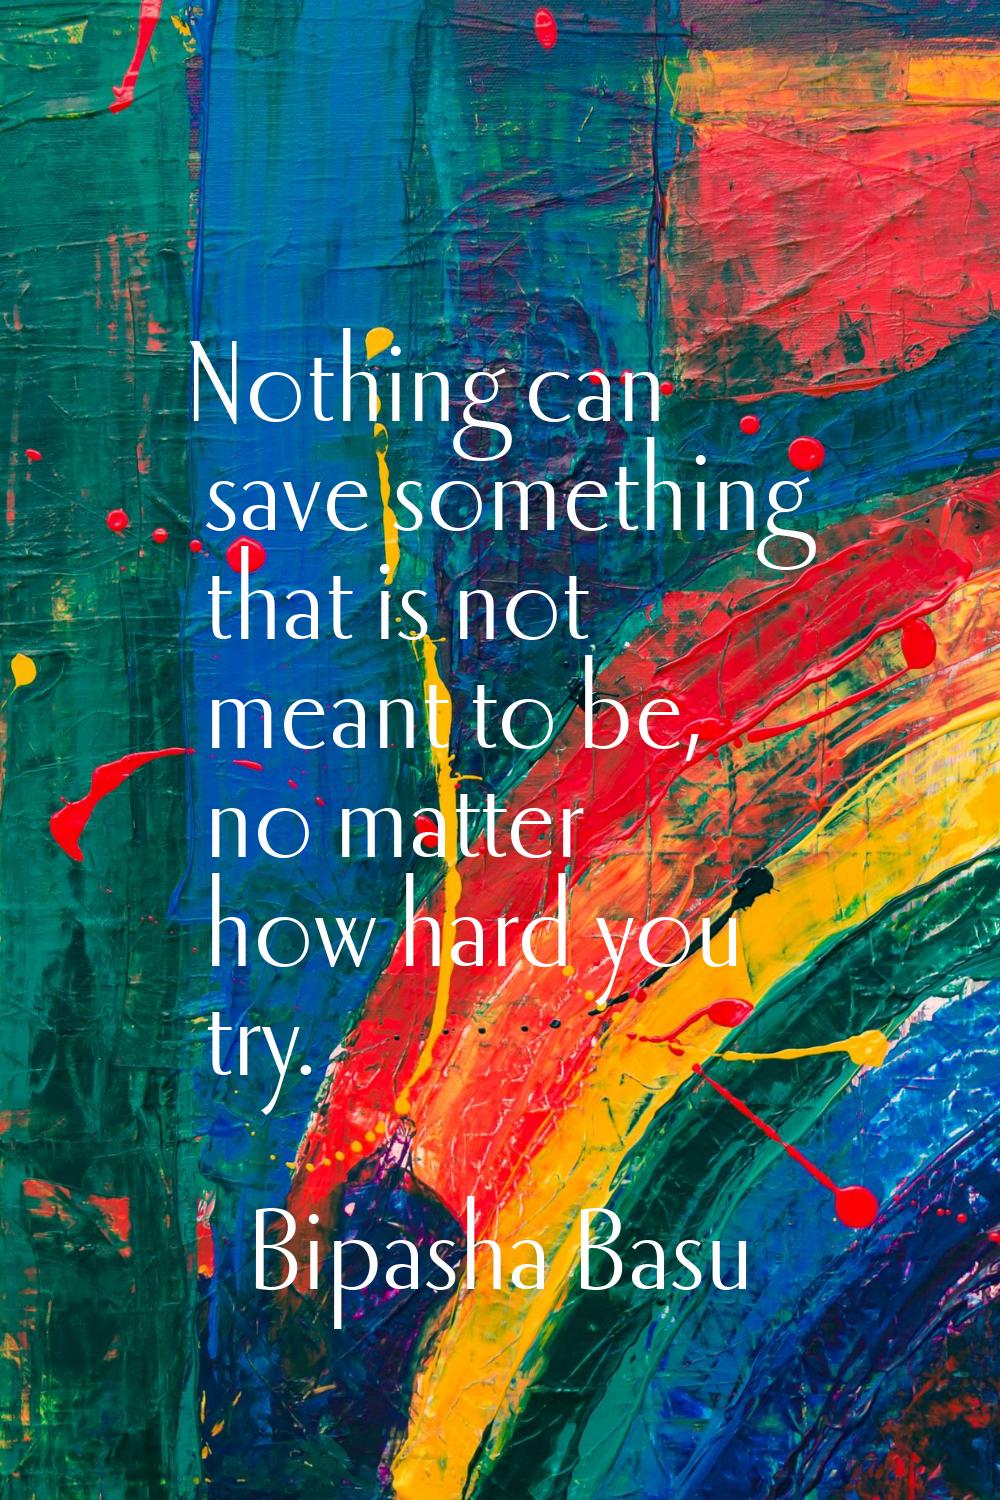 Nothing can save something that is not meant to be, no matter how hard you try.